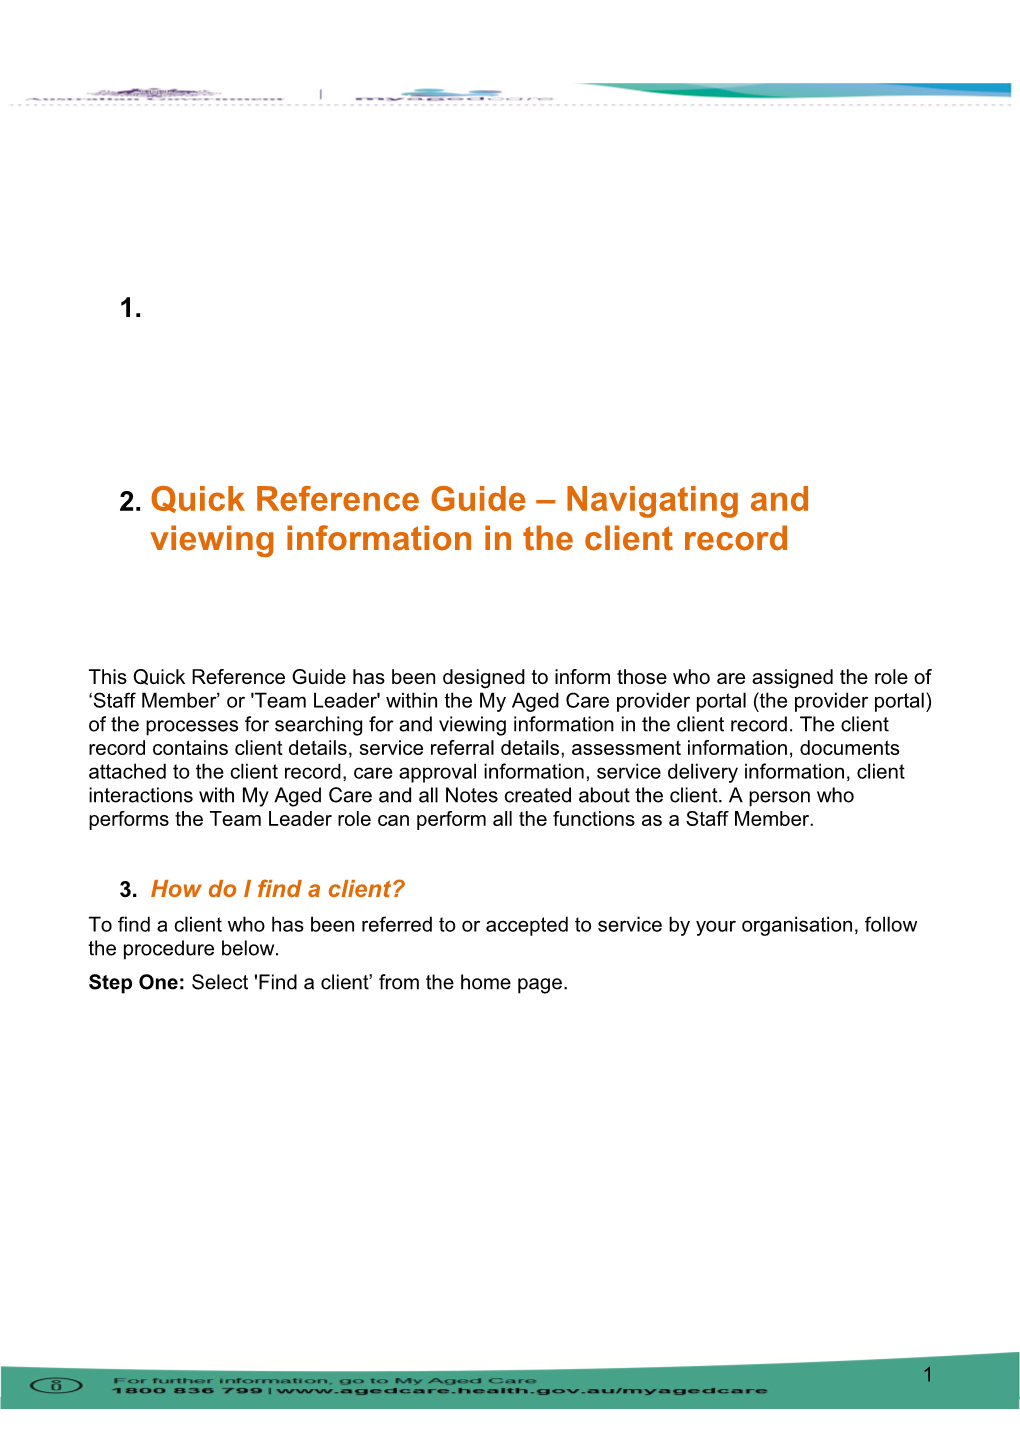 Quick Reference Guide Navigating and Viewing Information in the Client Record